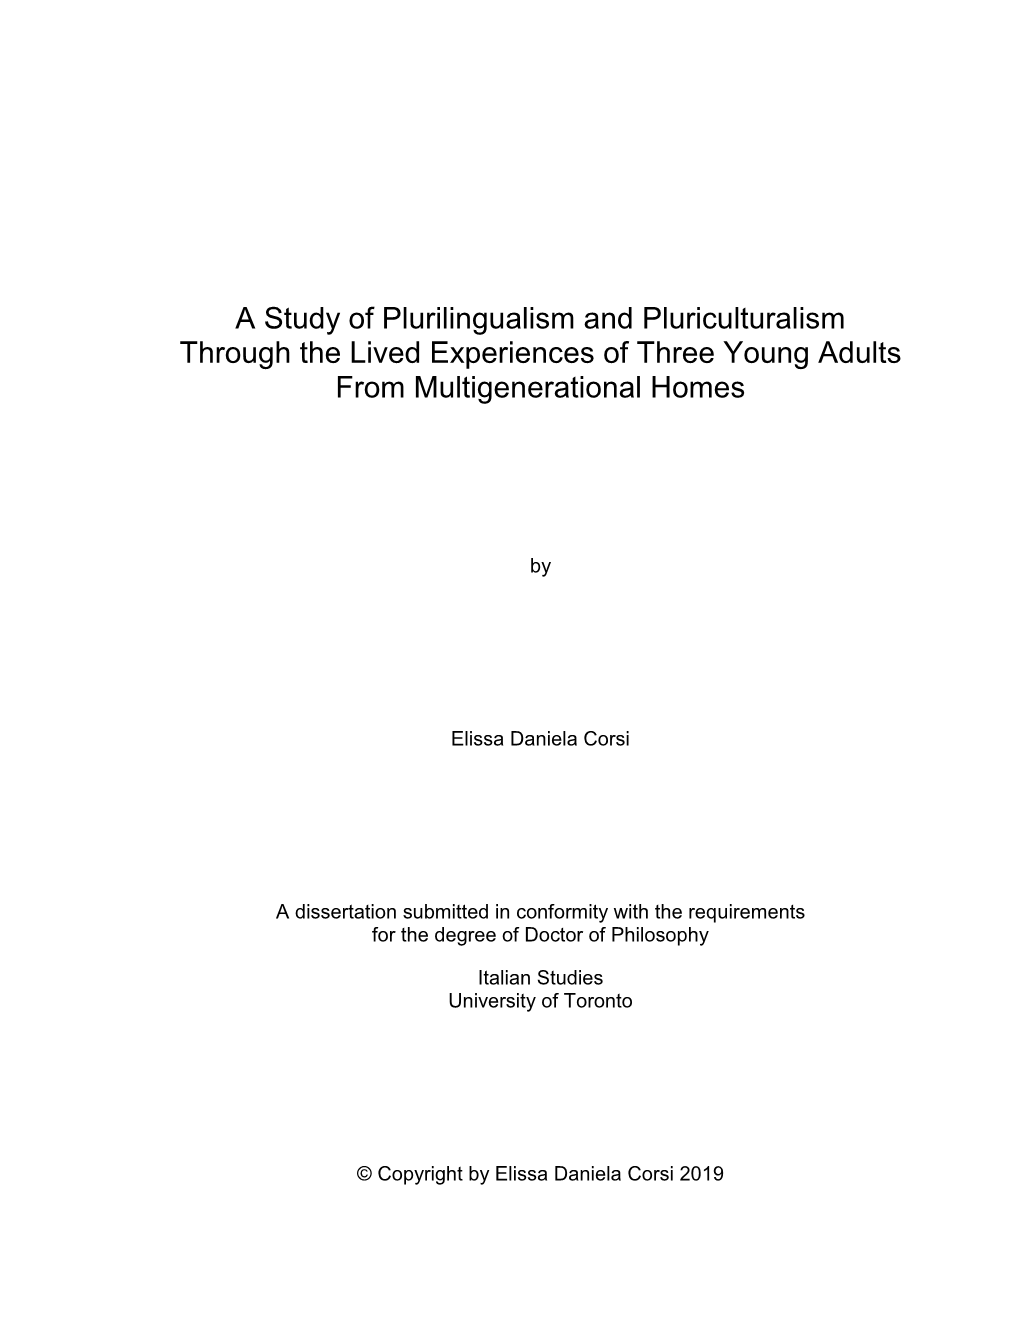 A Study of Plurilingualism and Pluriculturalism Through the Lived Experiences of Three Young Adults from Multigenerational Homes